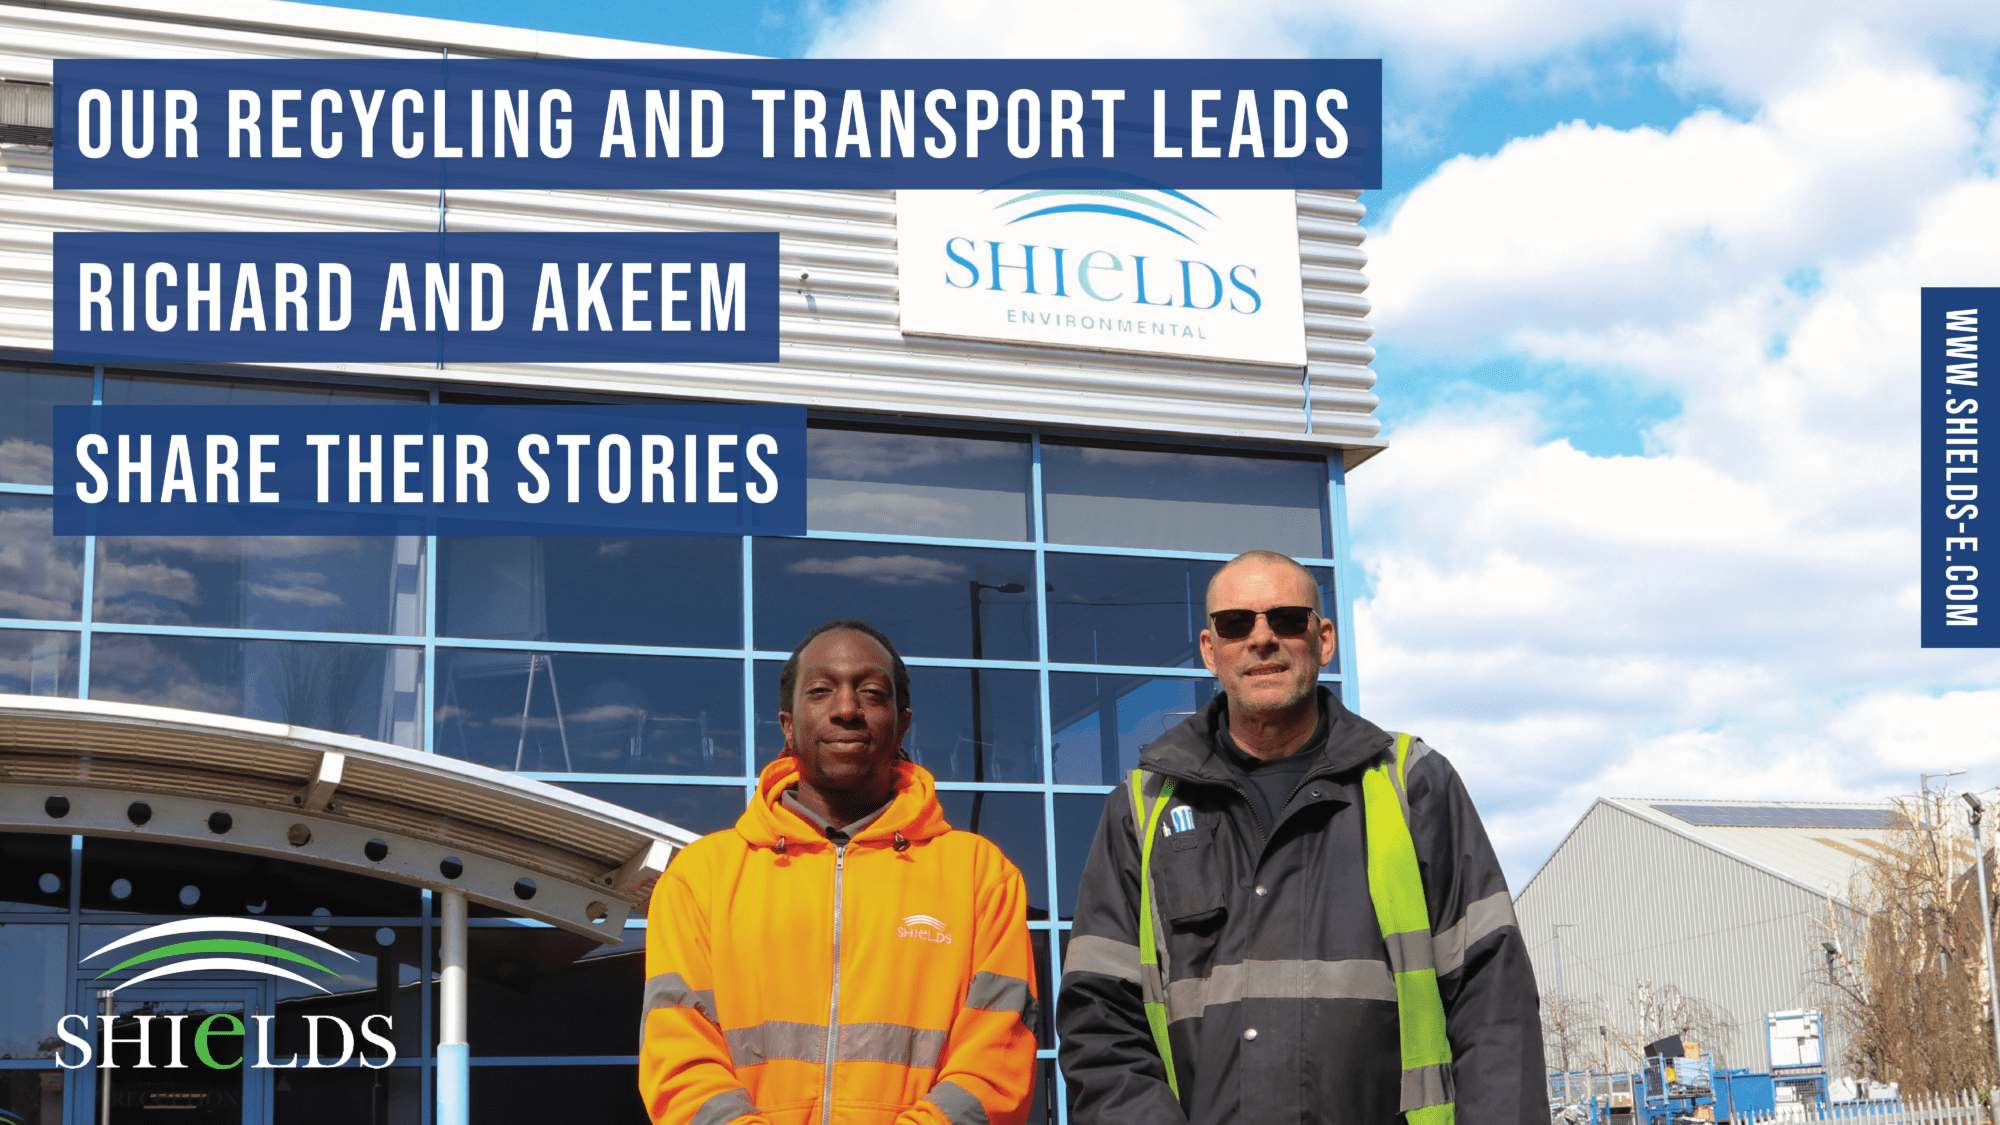 Richard and Akeem our recycling and transport leads share their stories blog header graphic